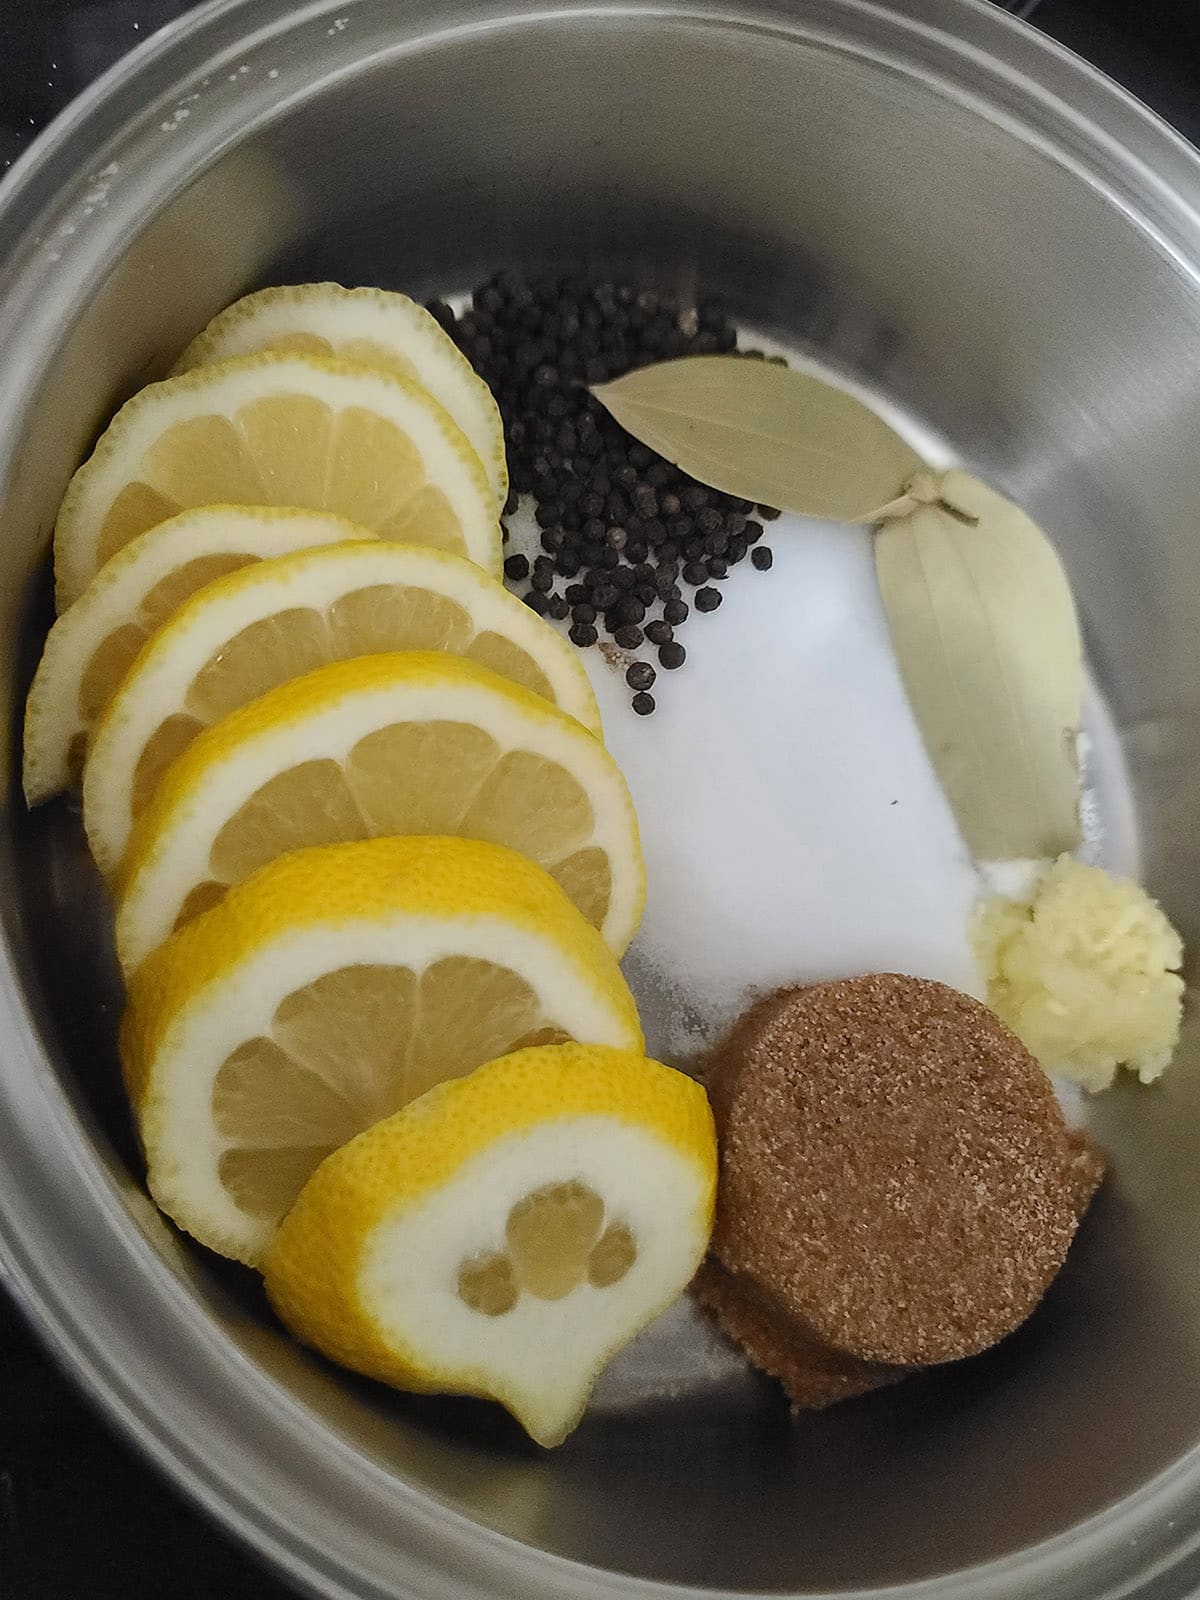 Lemon, brown sugar substitute, salt, garlic, and spices in a pot.